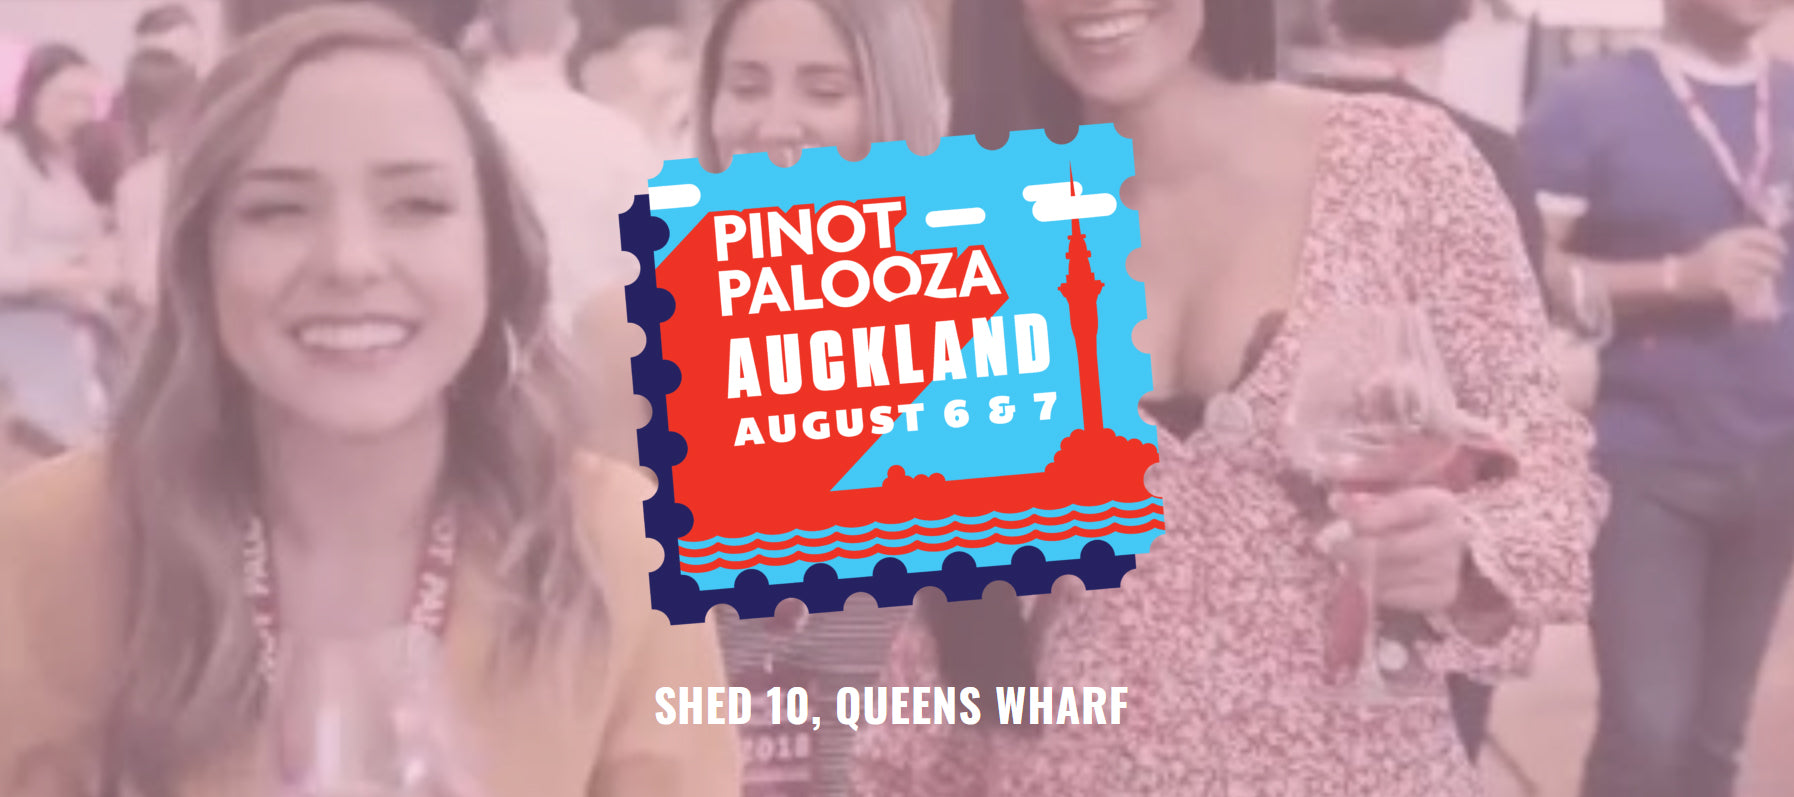 Pinot Palooza Auckland - 6th & 7th August 2021